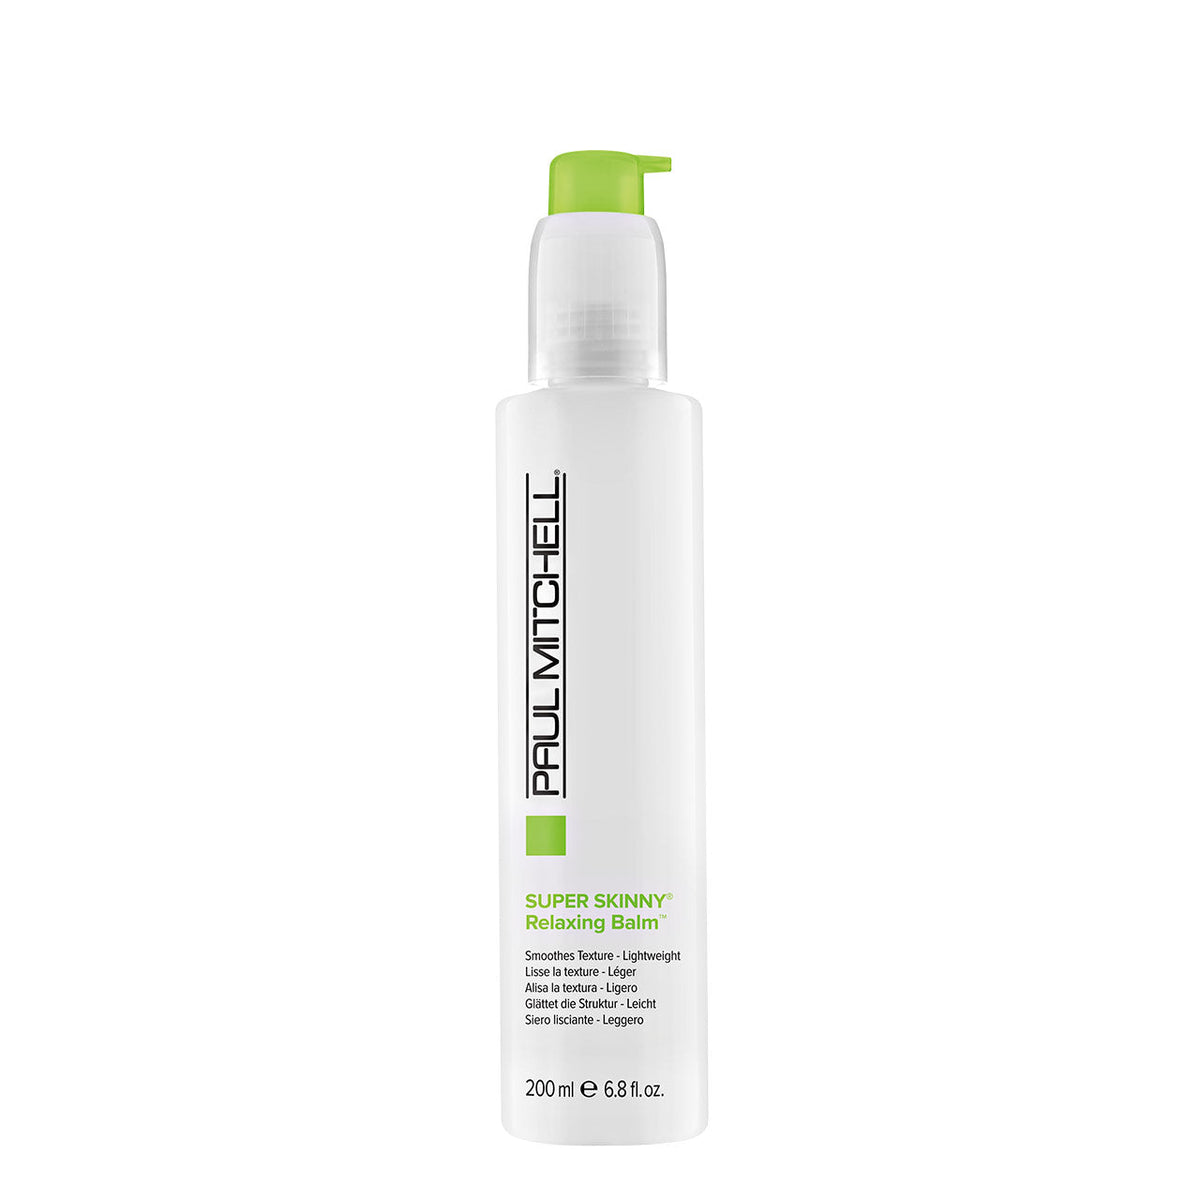 Smoothing Super Skinny Relaxing Balm - by Paul Mitchell |ProCare Outlet|